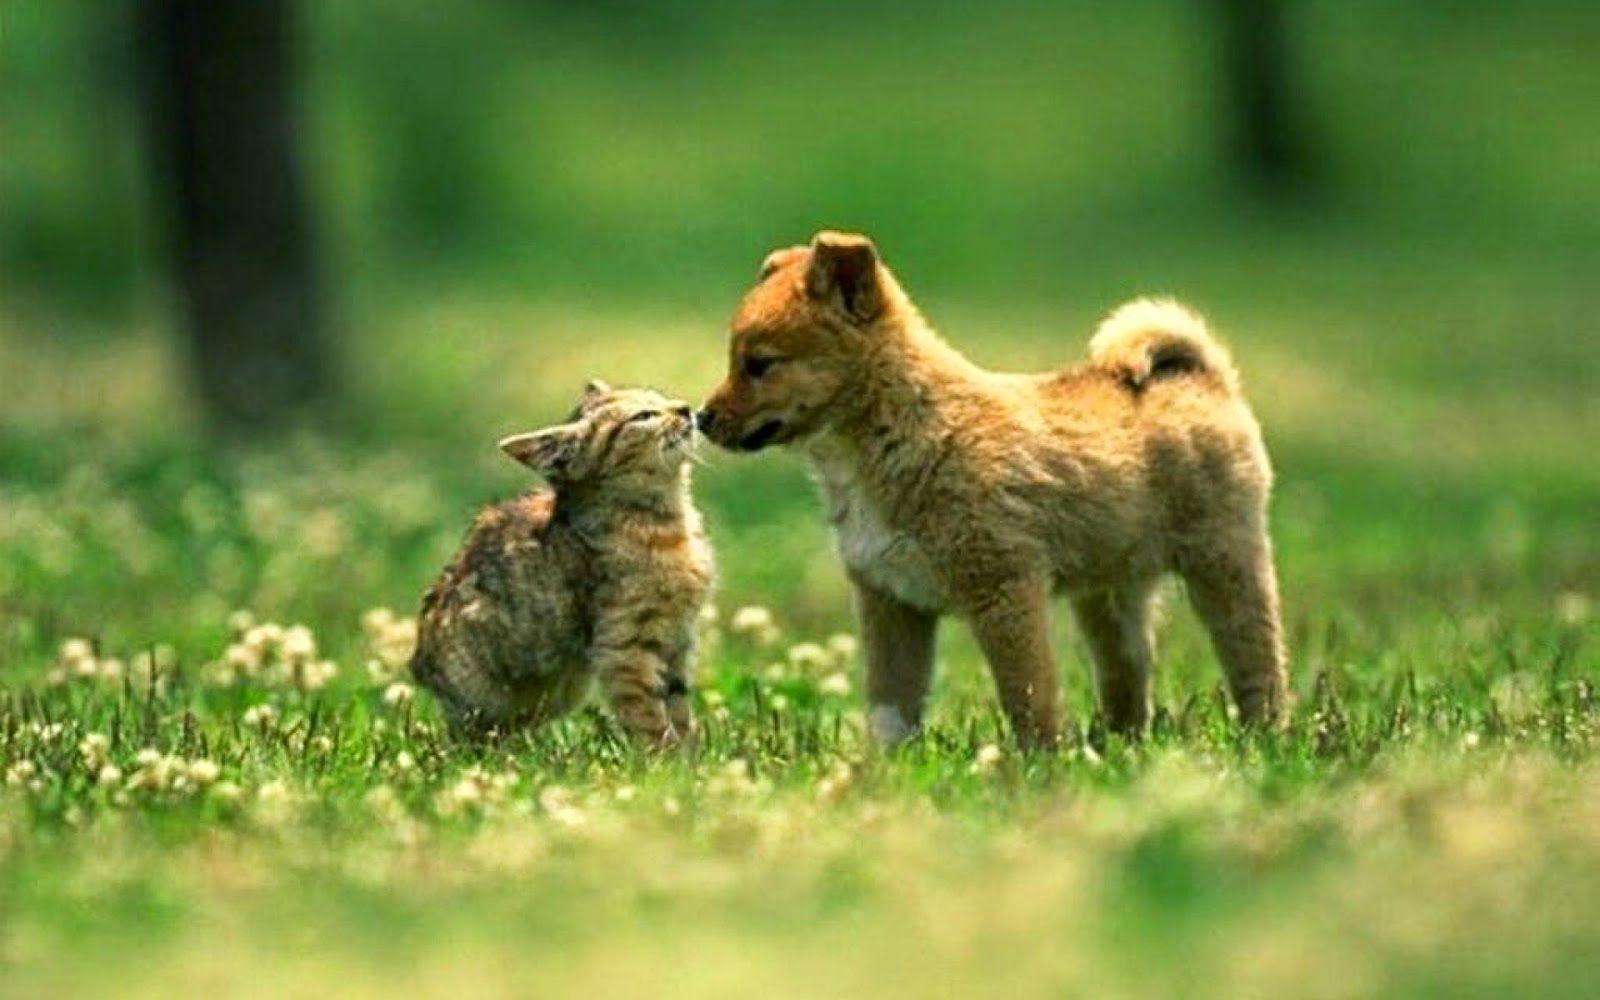 Cute Cats and Dogs Wallpapers - Top Free Cute Cats and Dogs ...